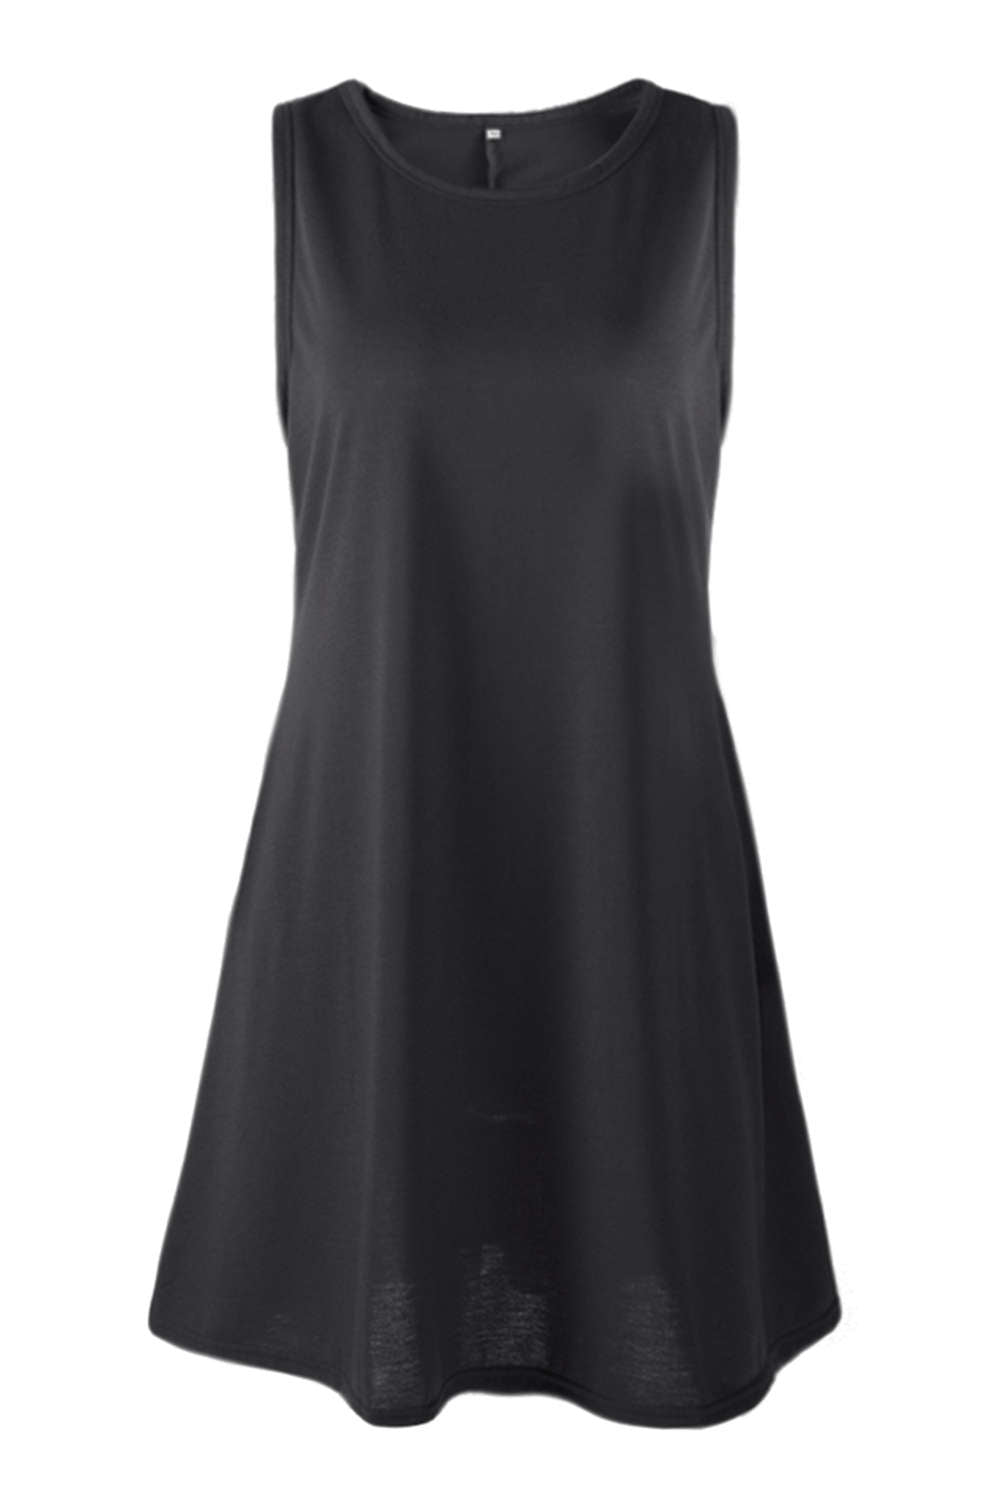 Iyasson Solid Color Tank Dress with Gathered Hem